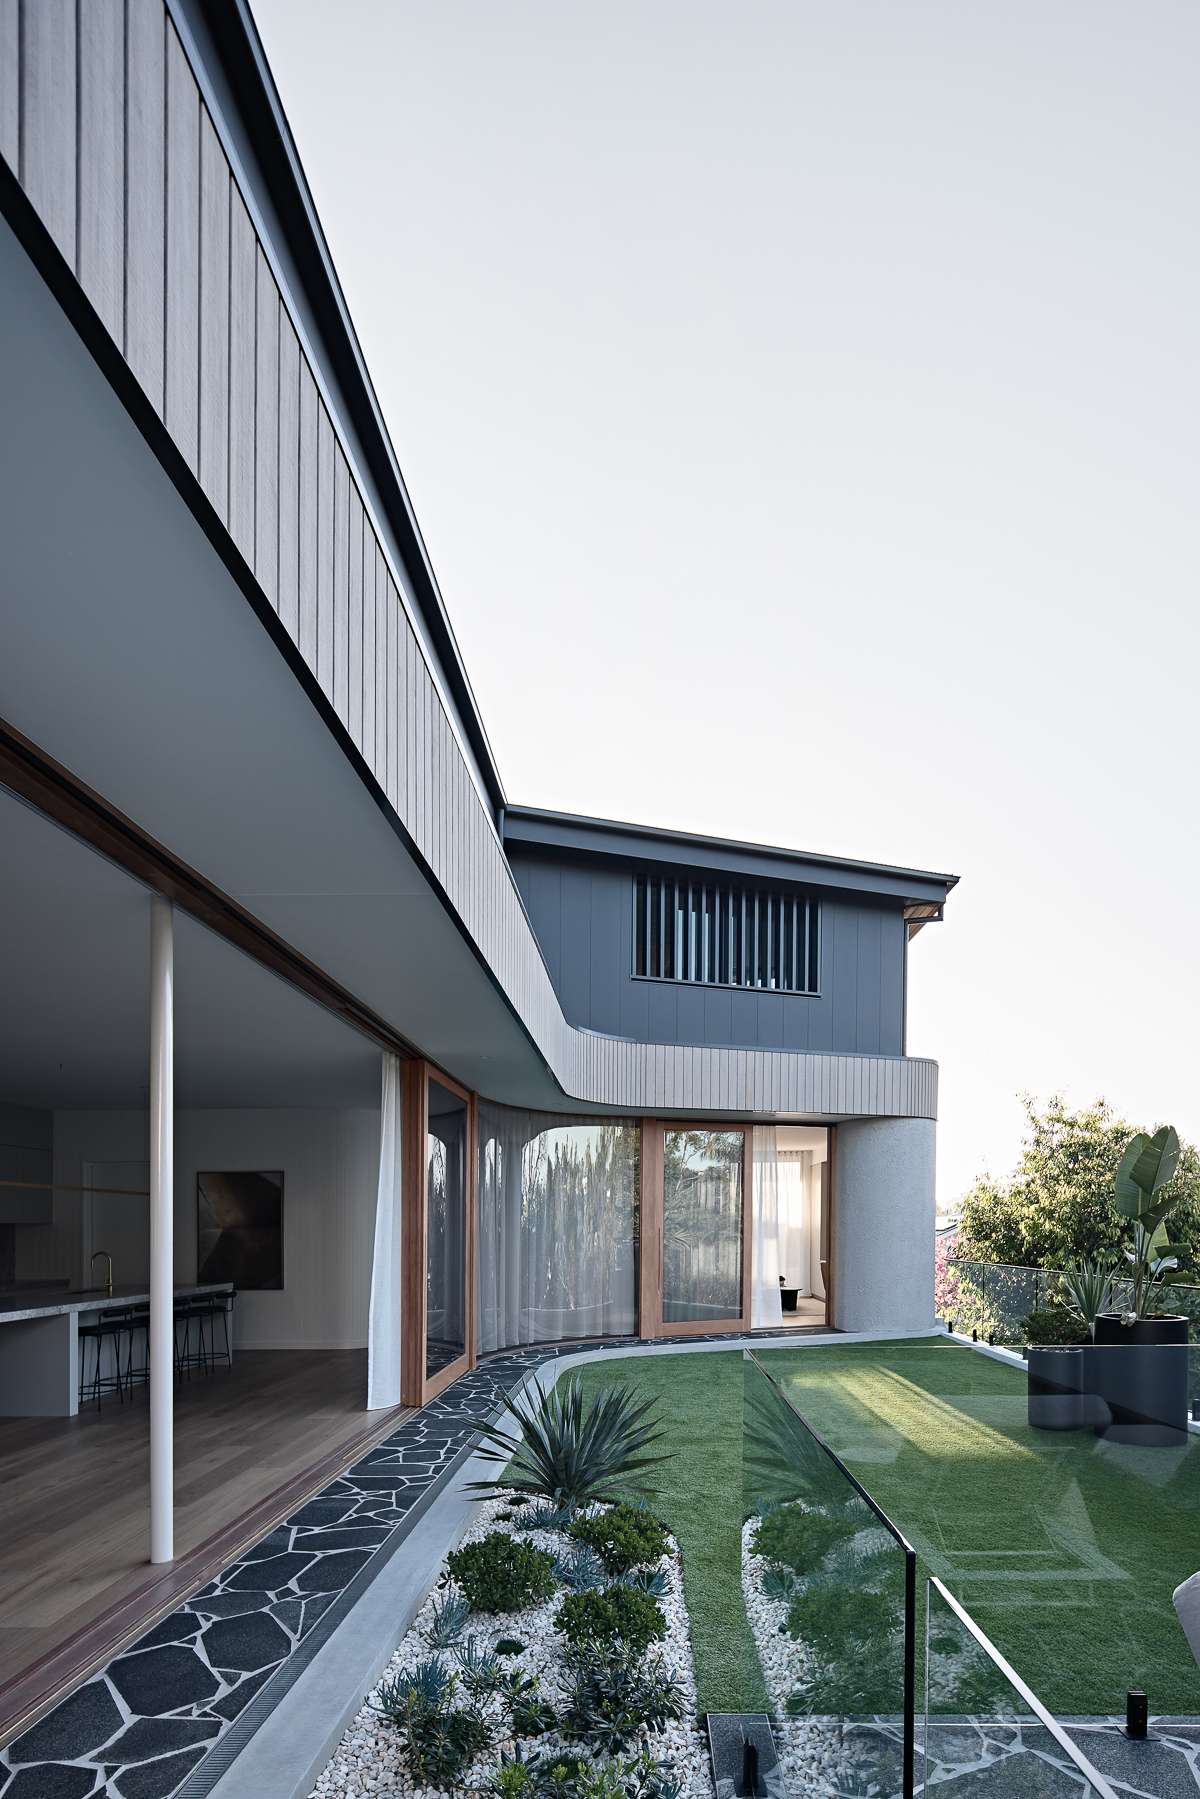 Amiri Courtyard House by Kelder Architects showing the landscaped courtyard